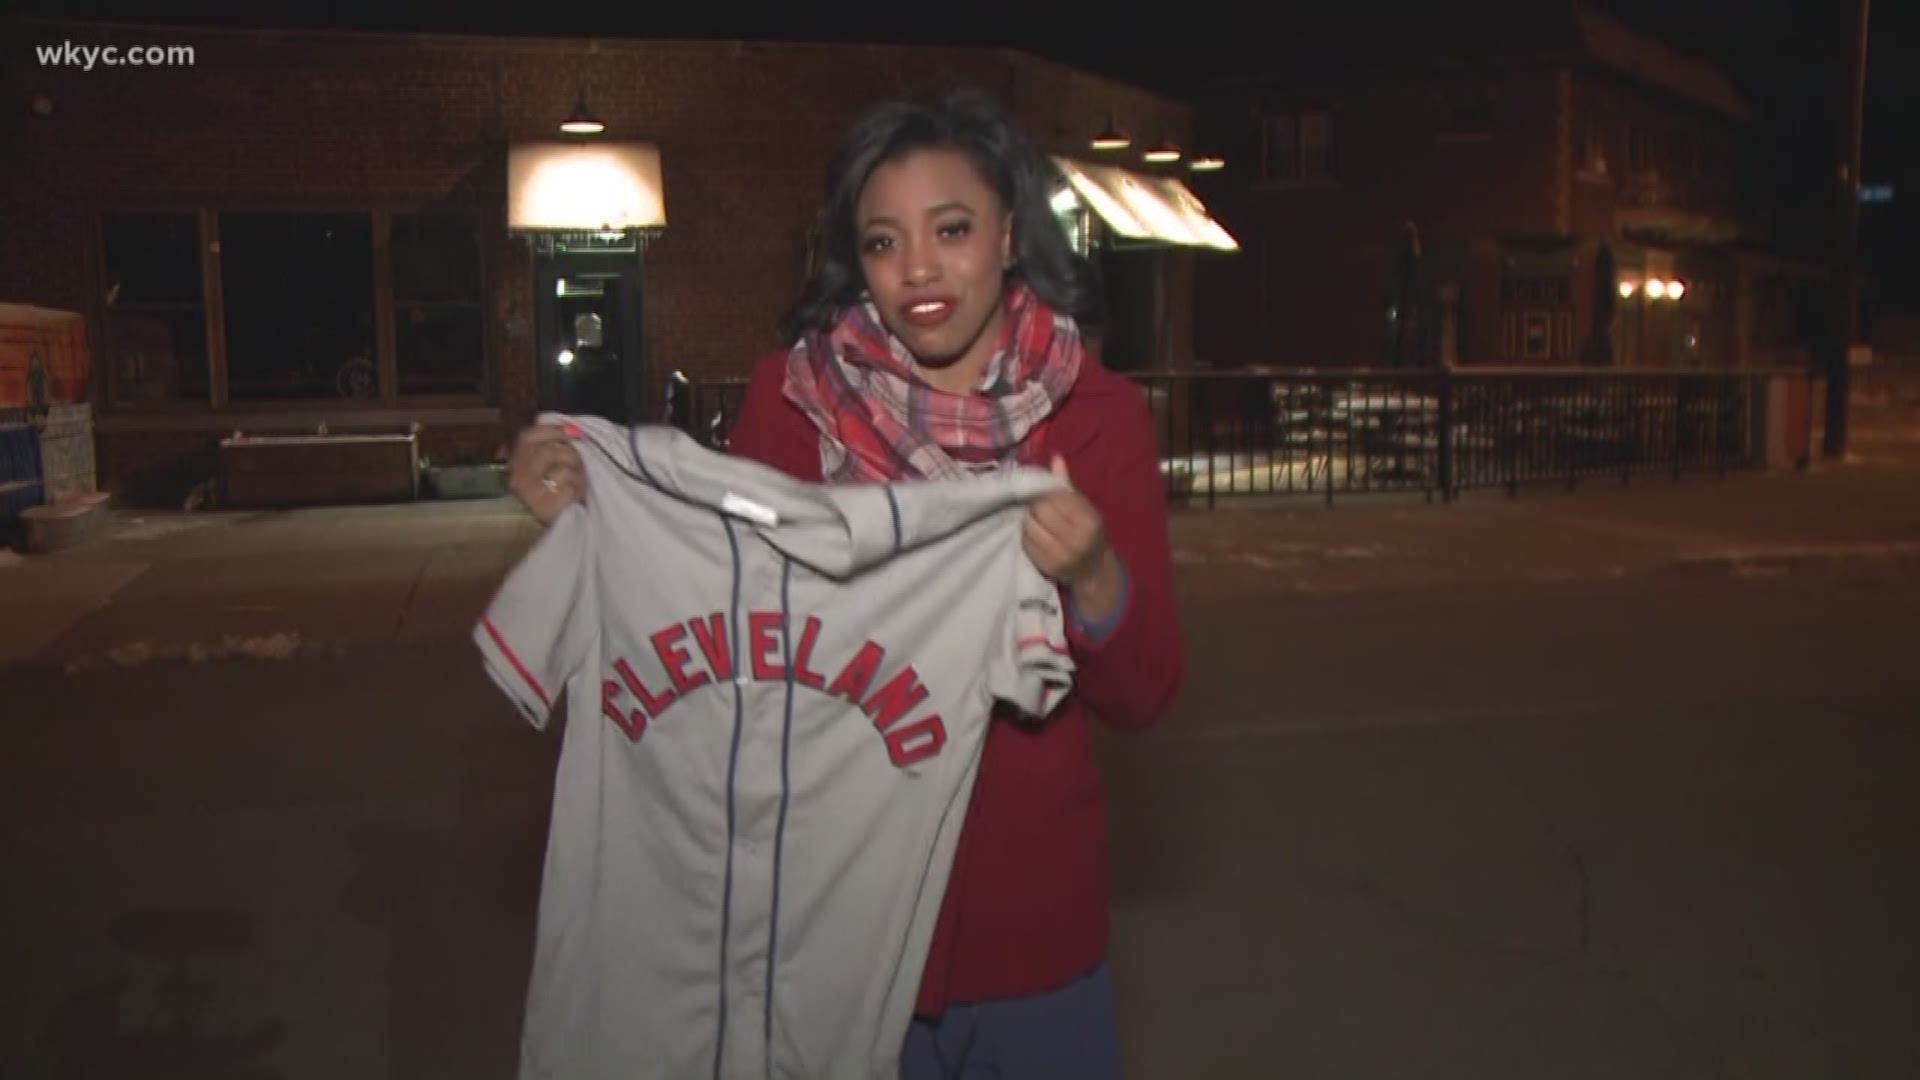 April 1, 2019: Who doesn't love free stuff? Here is how you can get a freebie today simply for being a Cleveland Indians fan.